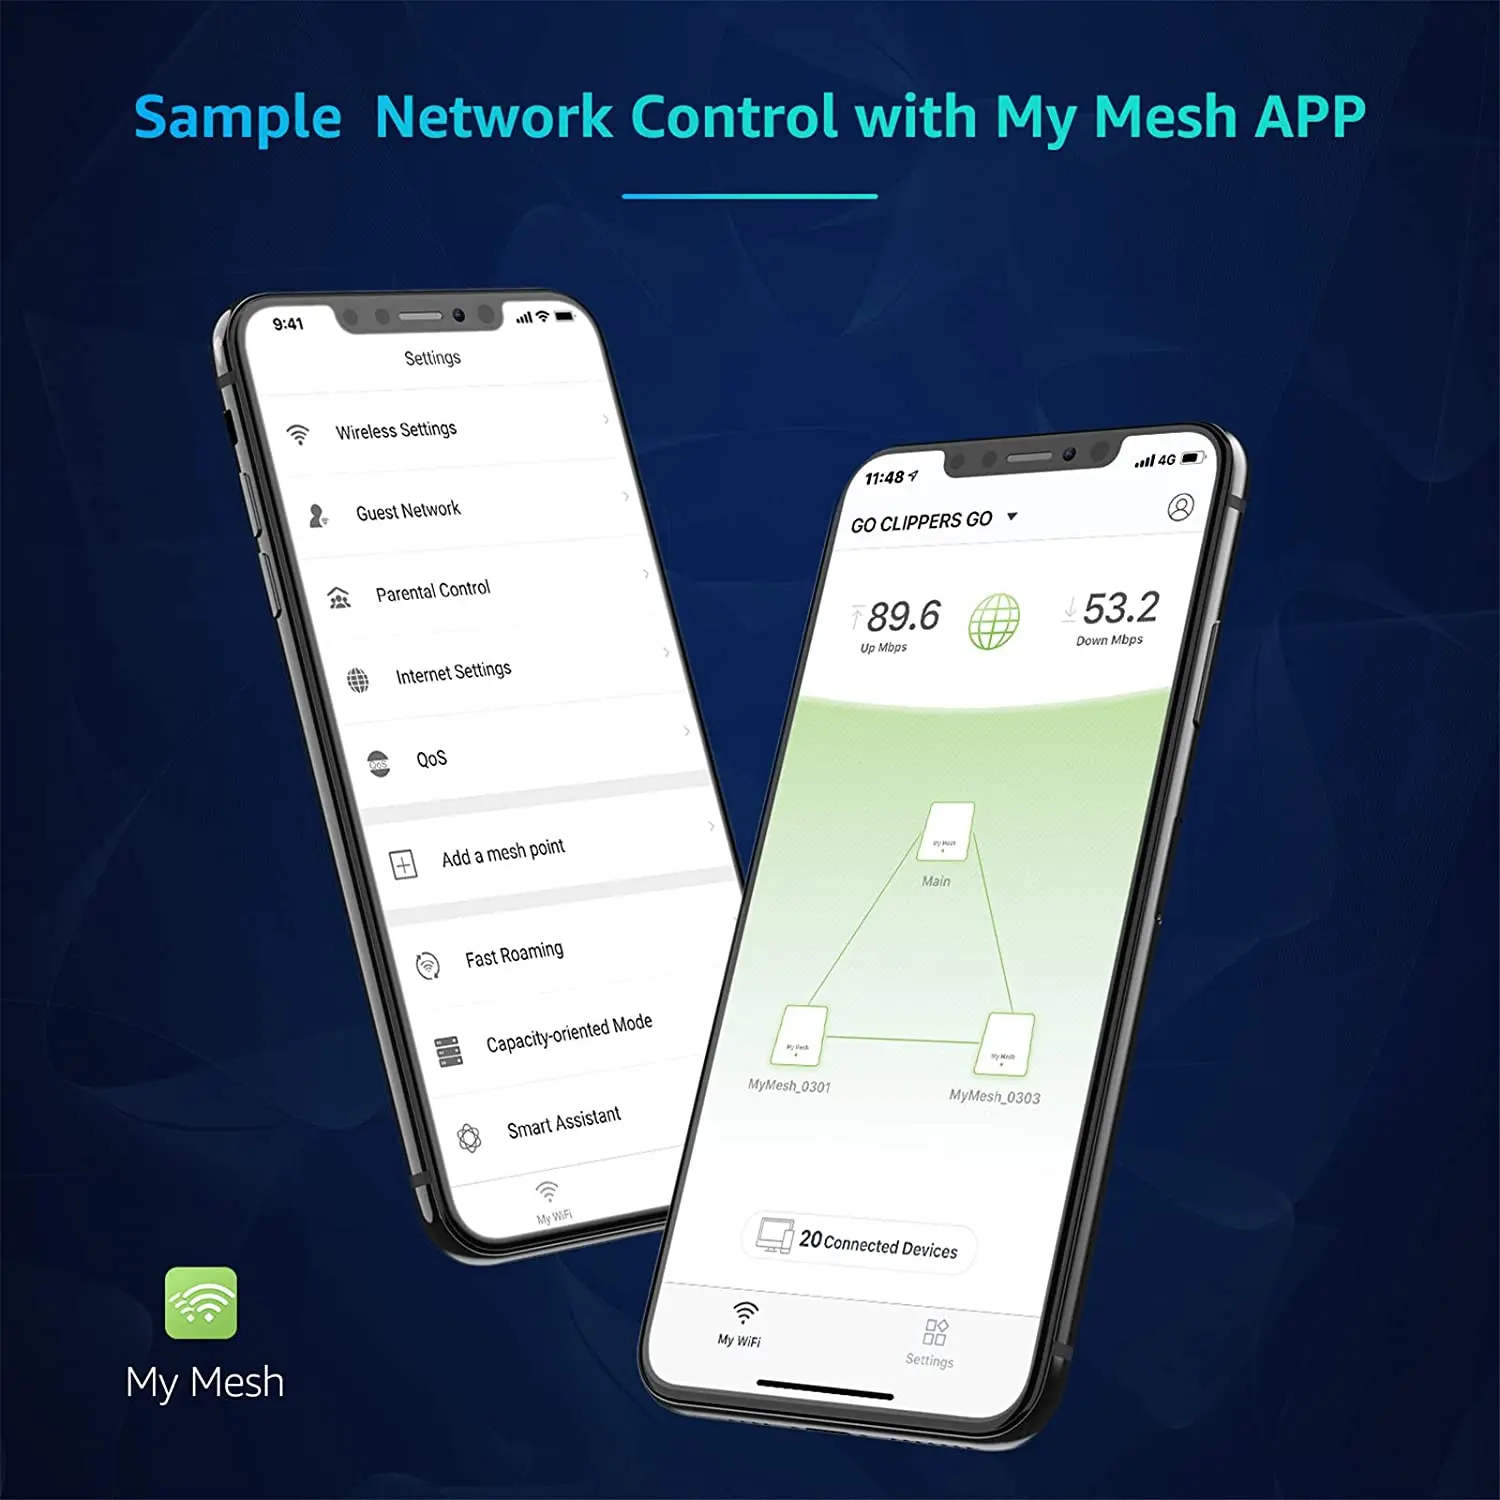 1200M Mesh WiFi System Meshforce M3s Up to 8000 sq.ft. Whole Home Coverage Gigabit Wi-Fi Router for Wireless Internet Networking portable wifi signal booster Wireless Routers